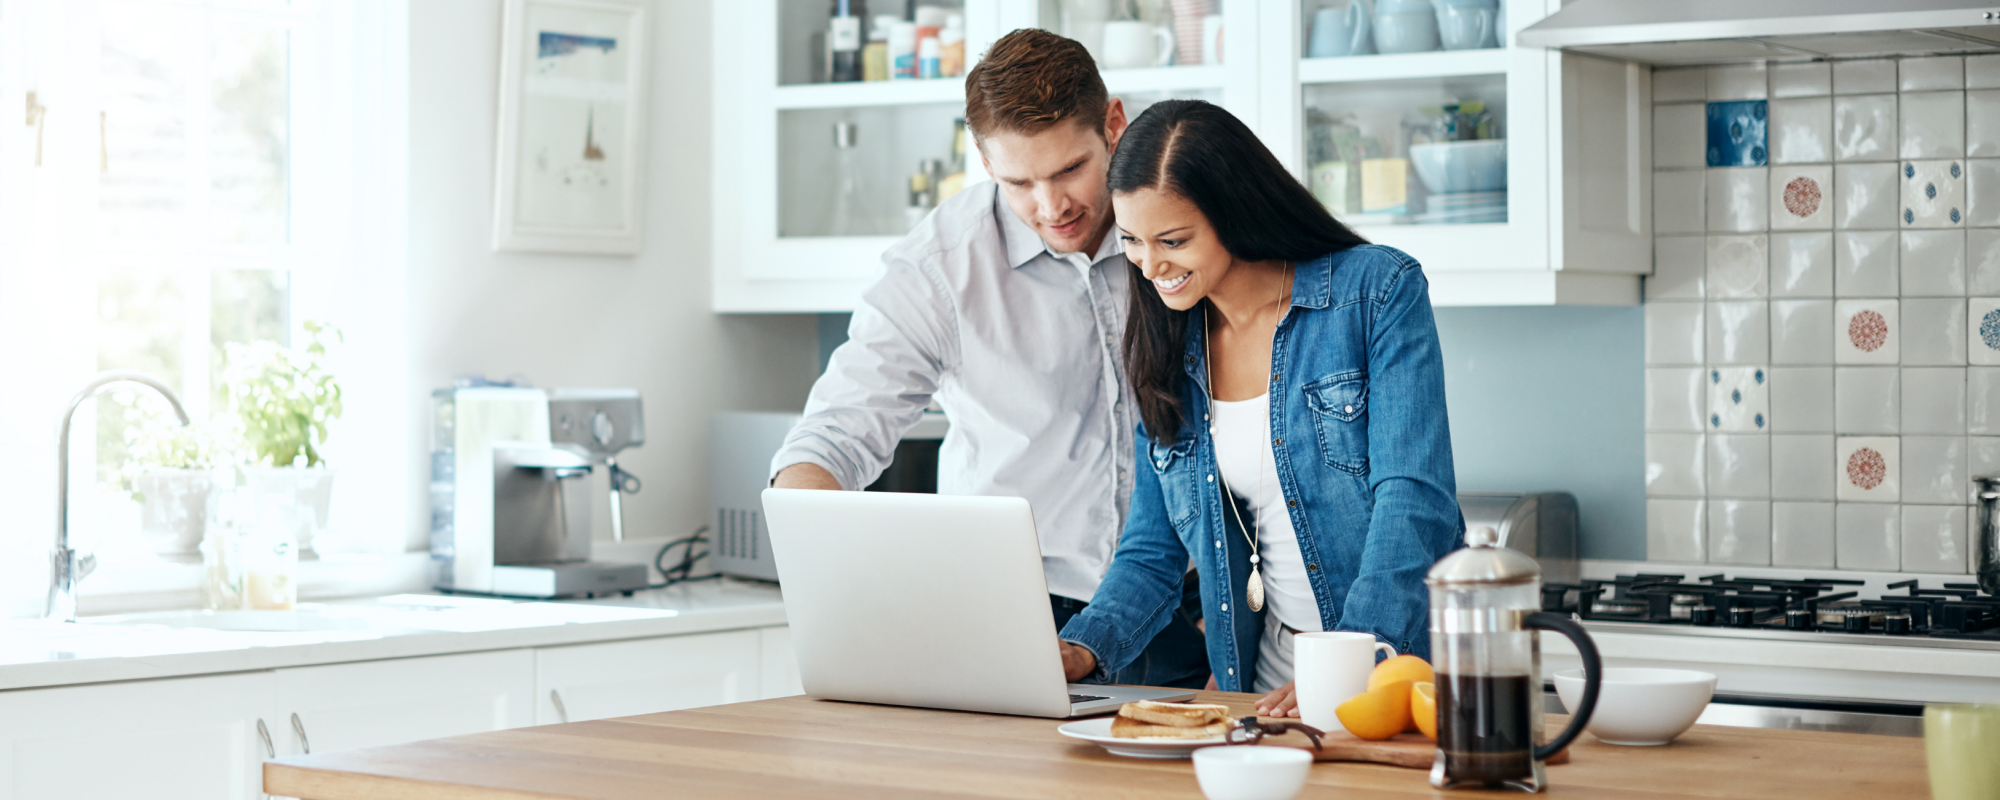 Man and Woman looking at a laptop in the kitchen during breakfast